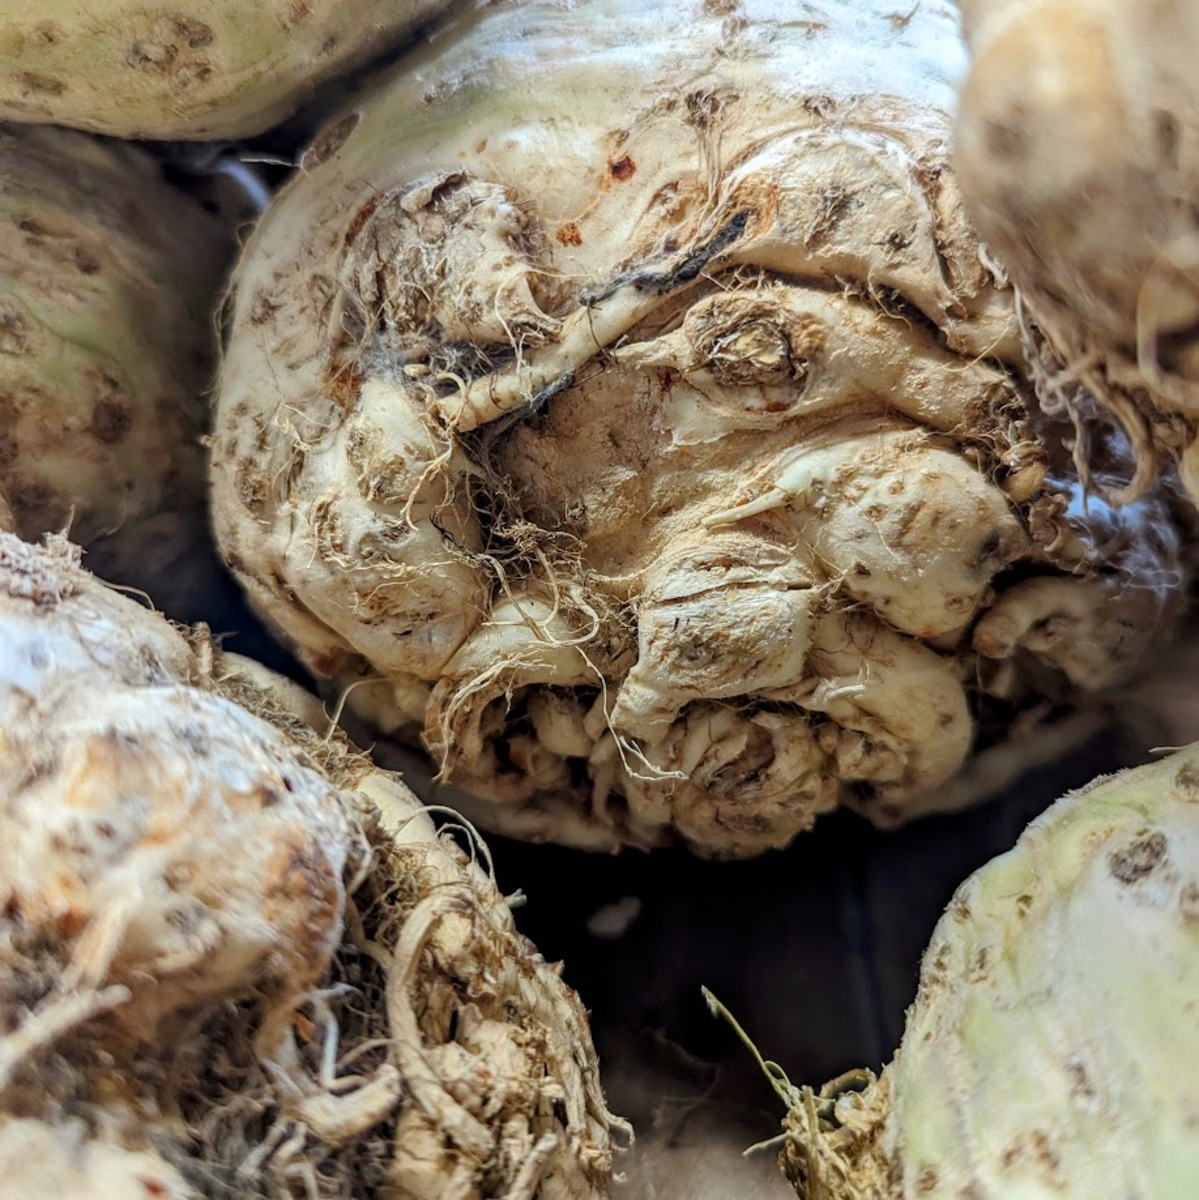 Close up shot of a single celery root among a pile of them. It's a large bulb and the way the roots mangle into a wird pattern at the bottom might trigger some people.